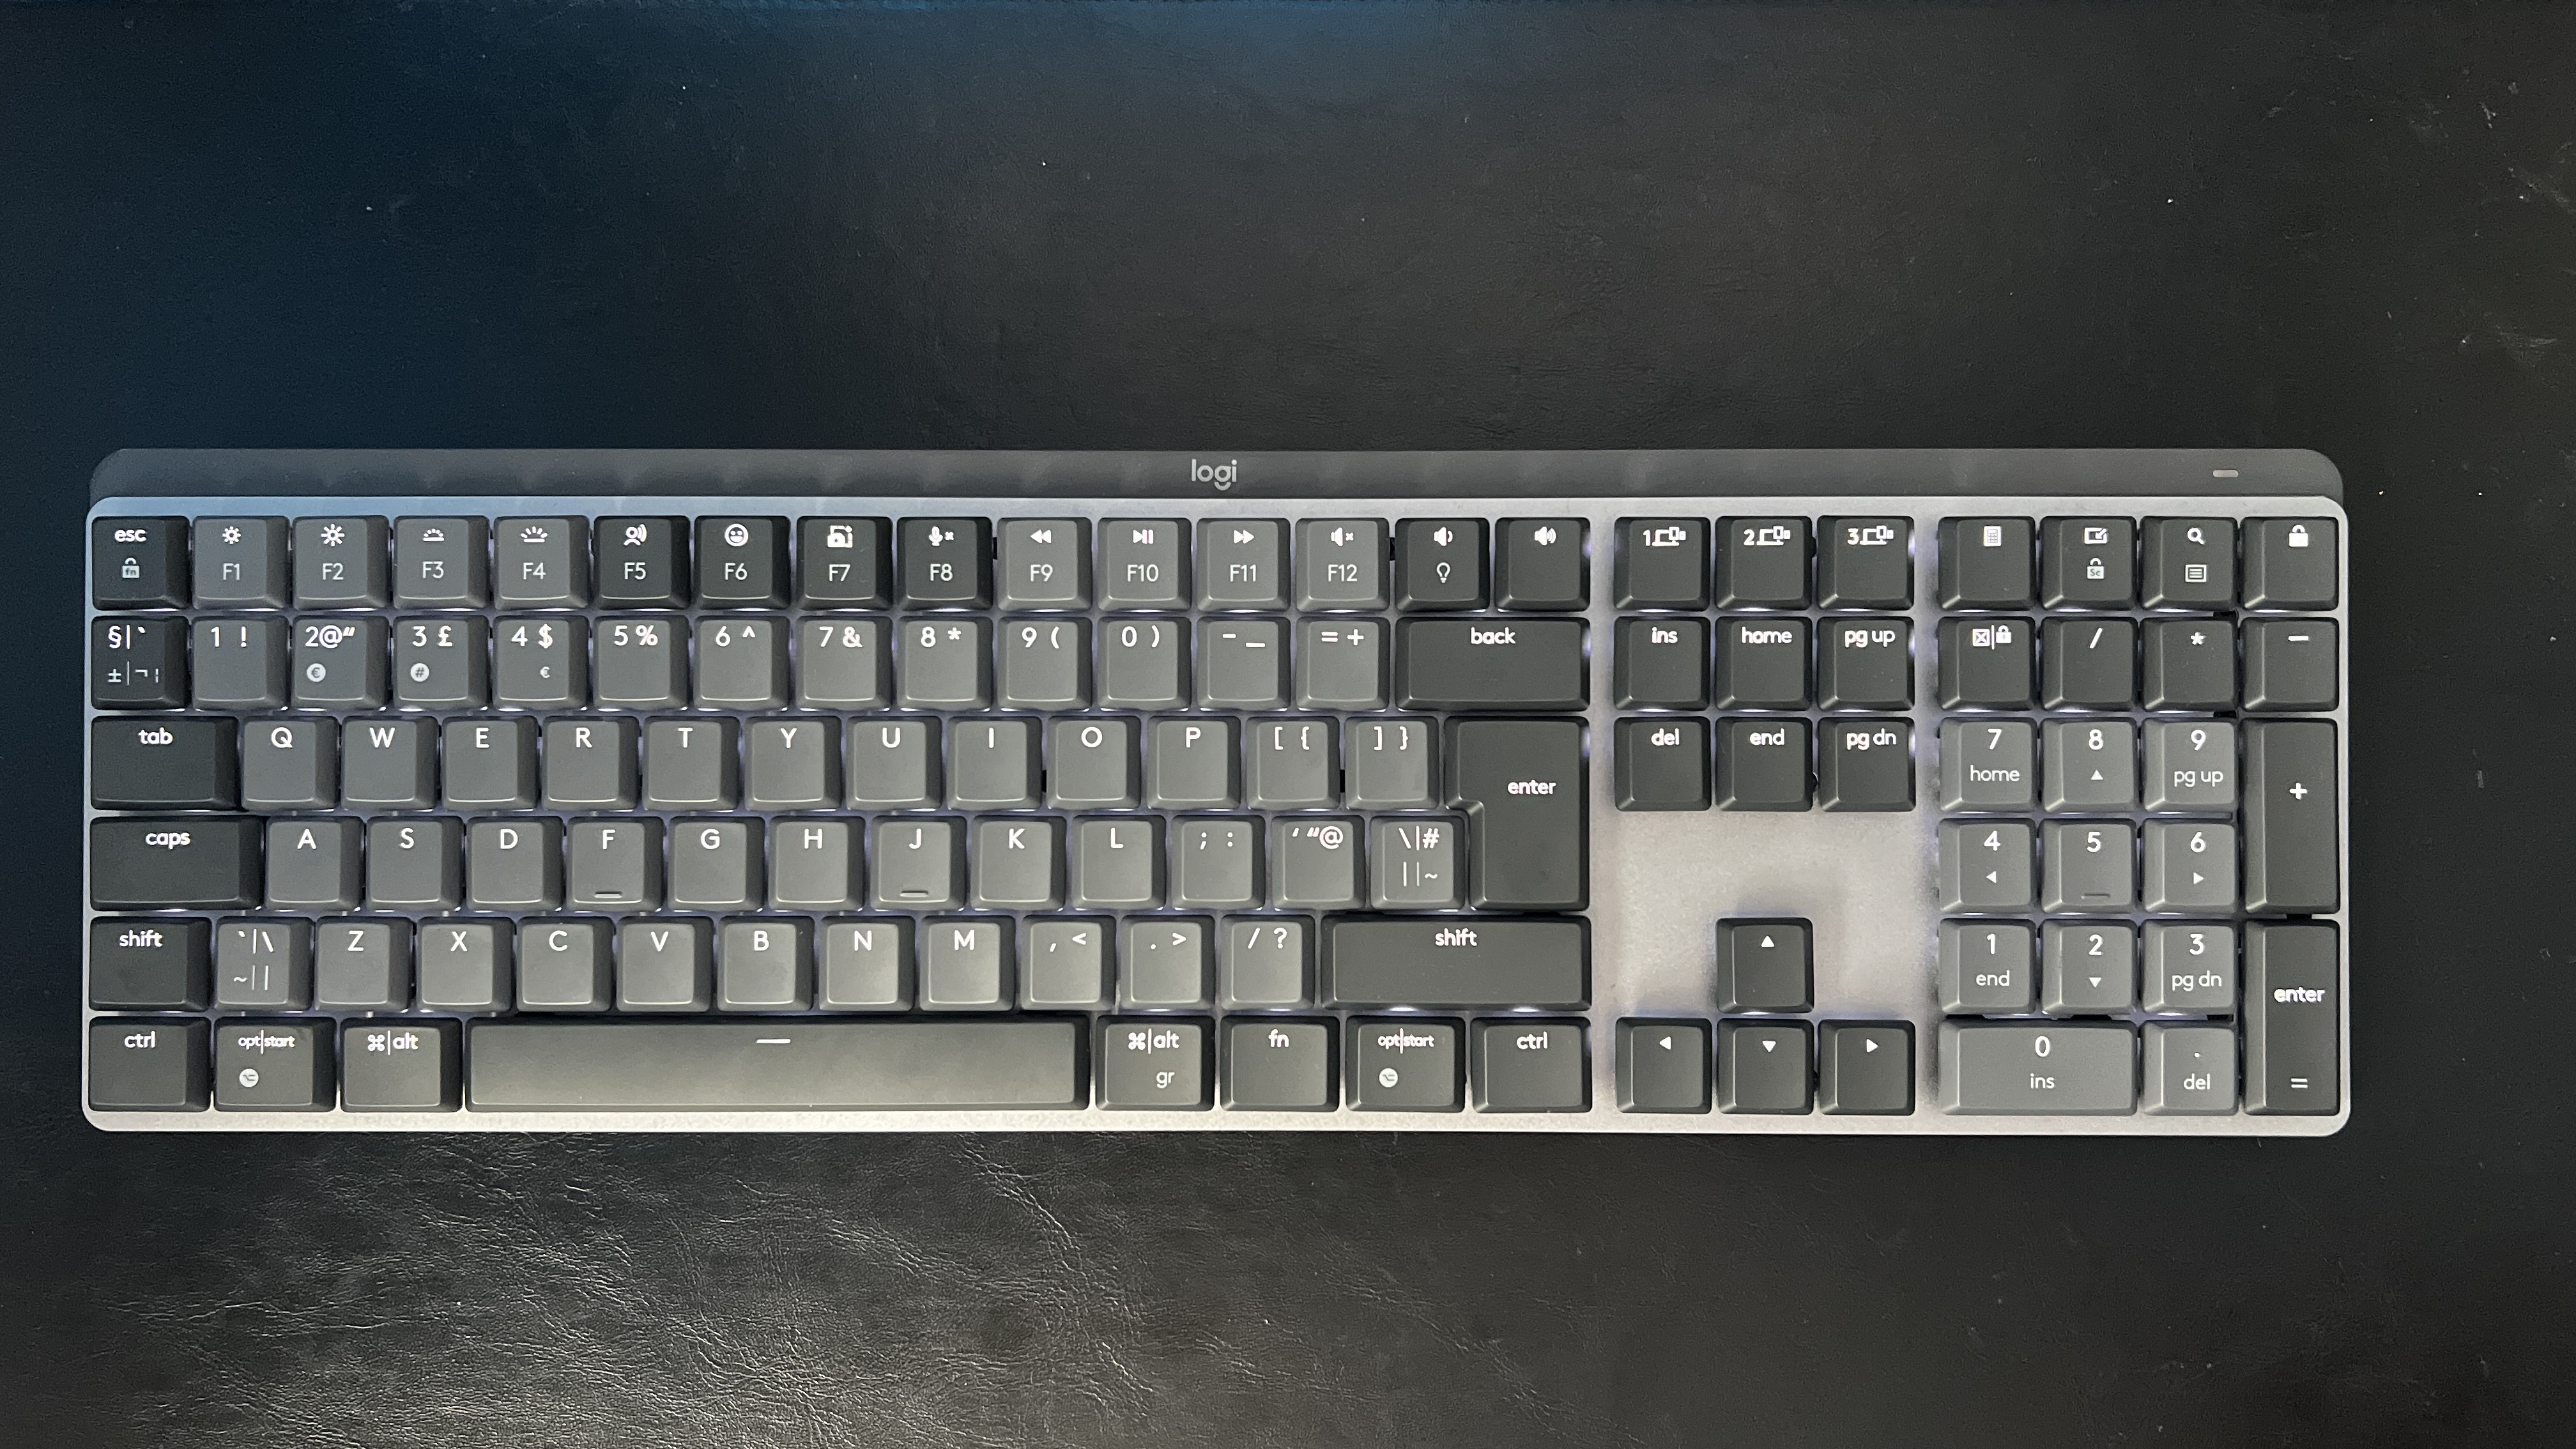 Is it wrong to prefer the regular MX Keys to the MX Mechanical